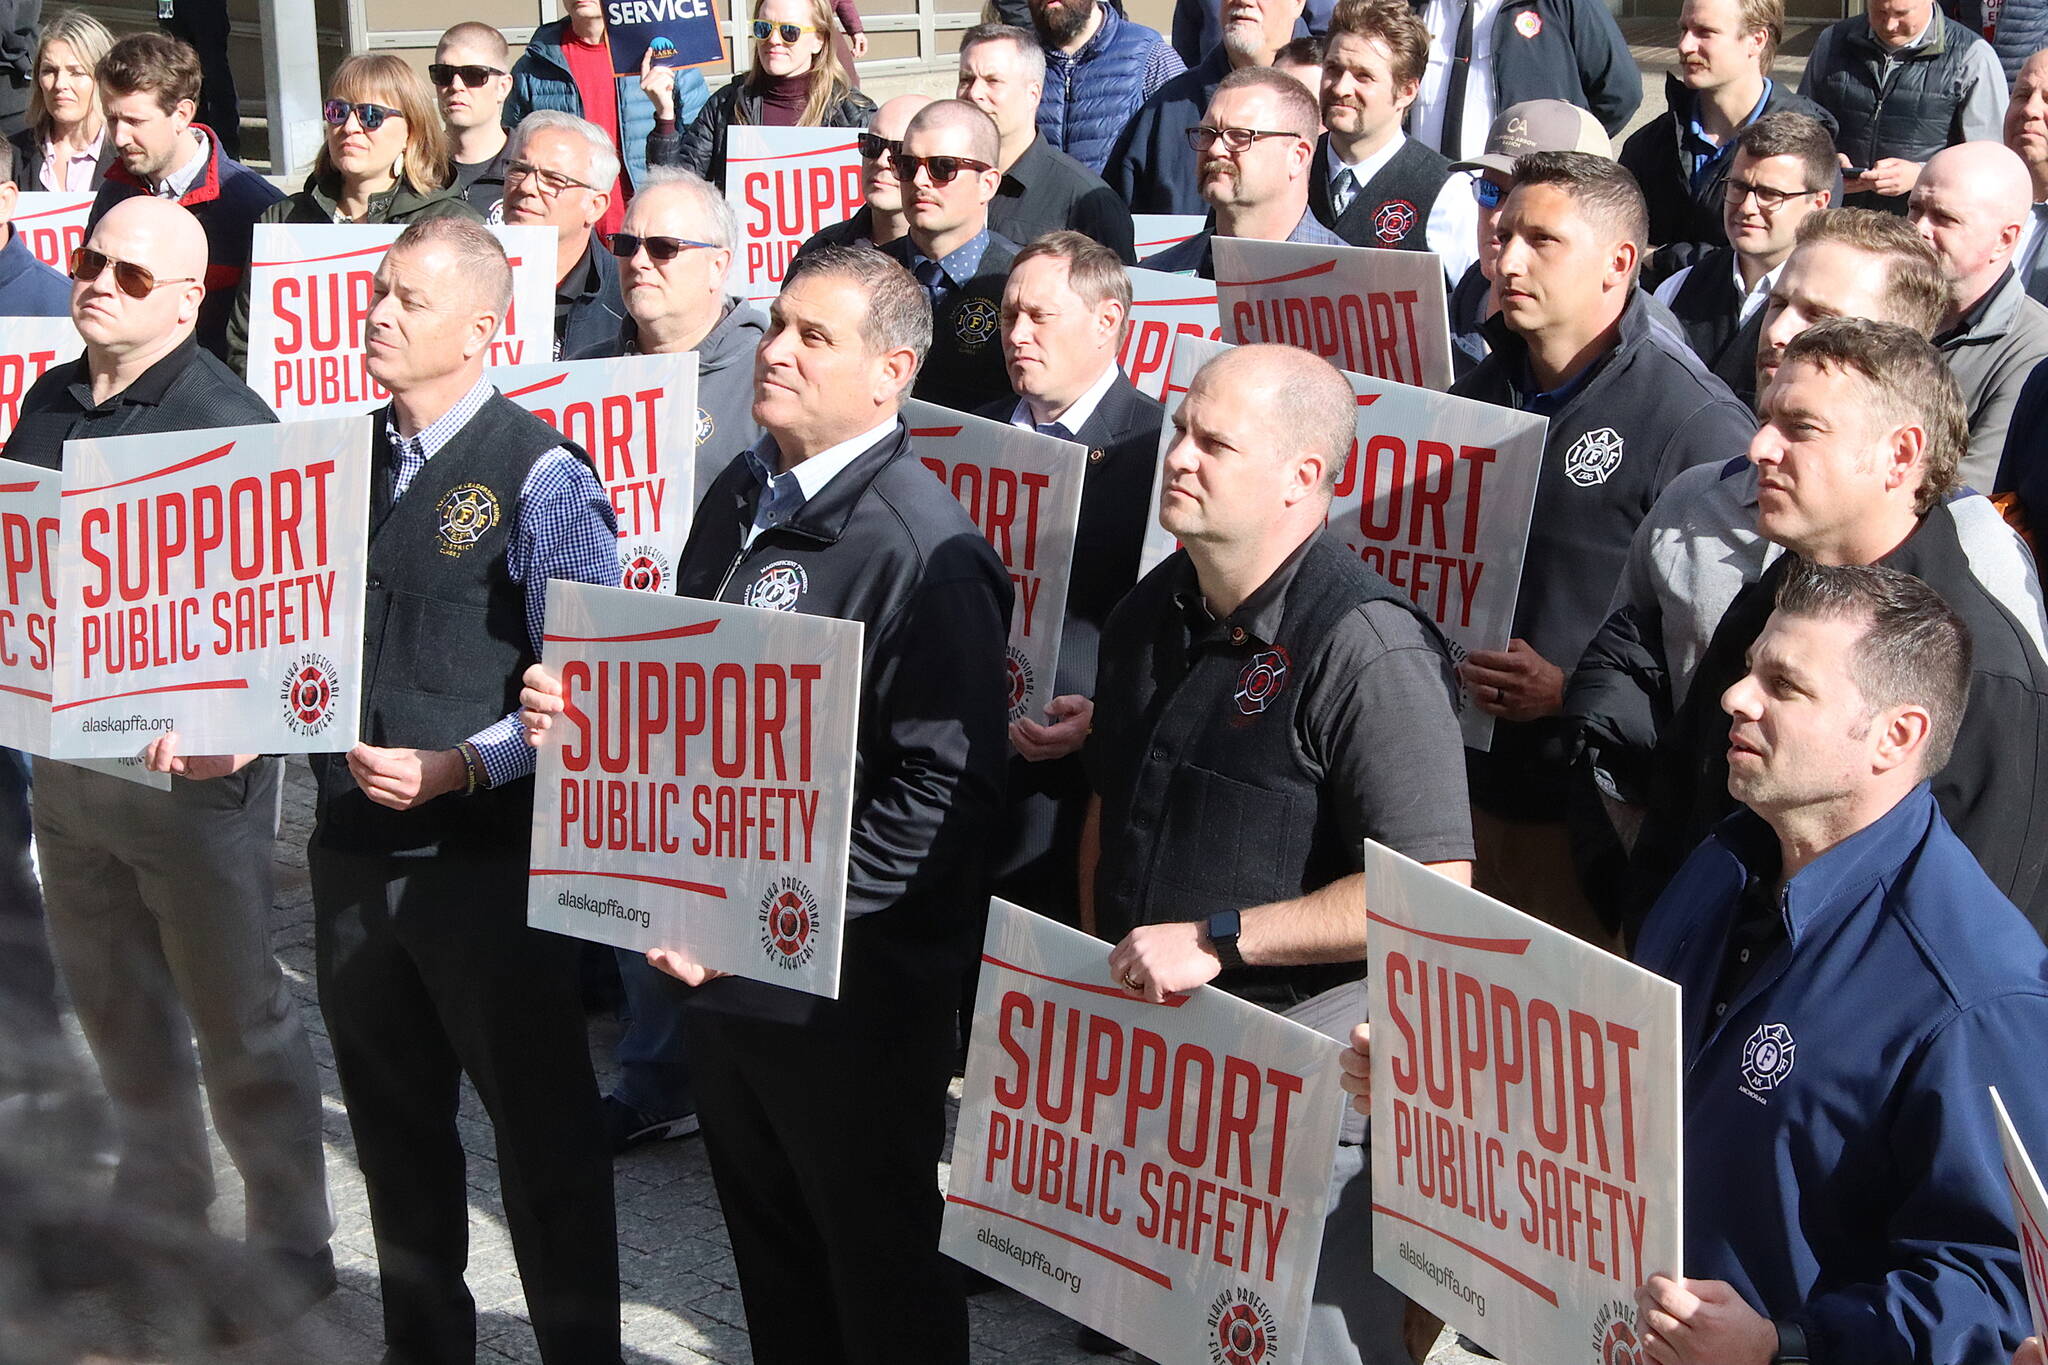 Public safety officials and supporters hold signs during a protest at the Alaska State Capitol on Tuesday afternoon calling for the restoration of state employee pensions. (Mark Sabbatini / Juneau Empire)